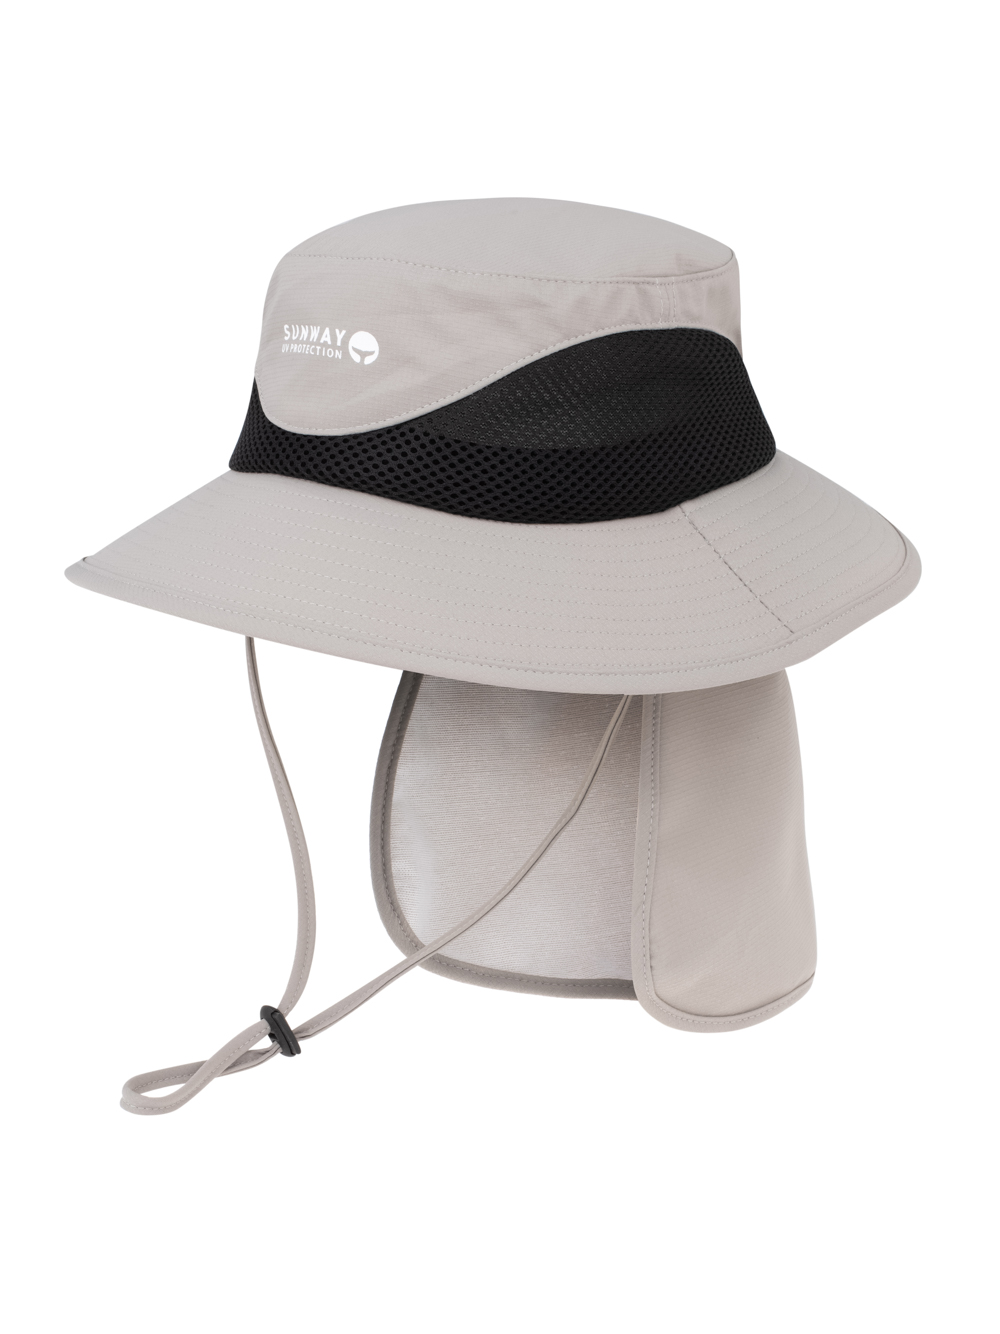 Wide brim Hat with Extra Foldable Back Protection